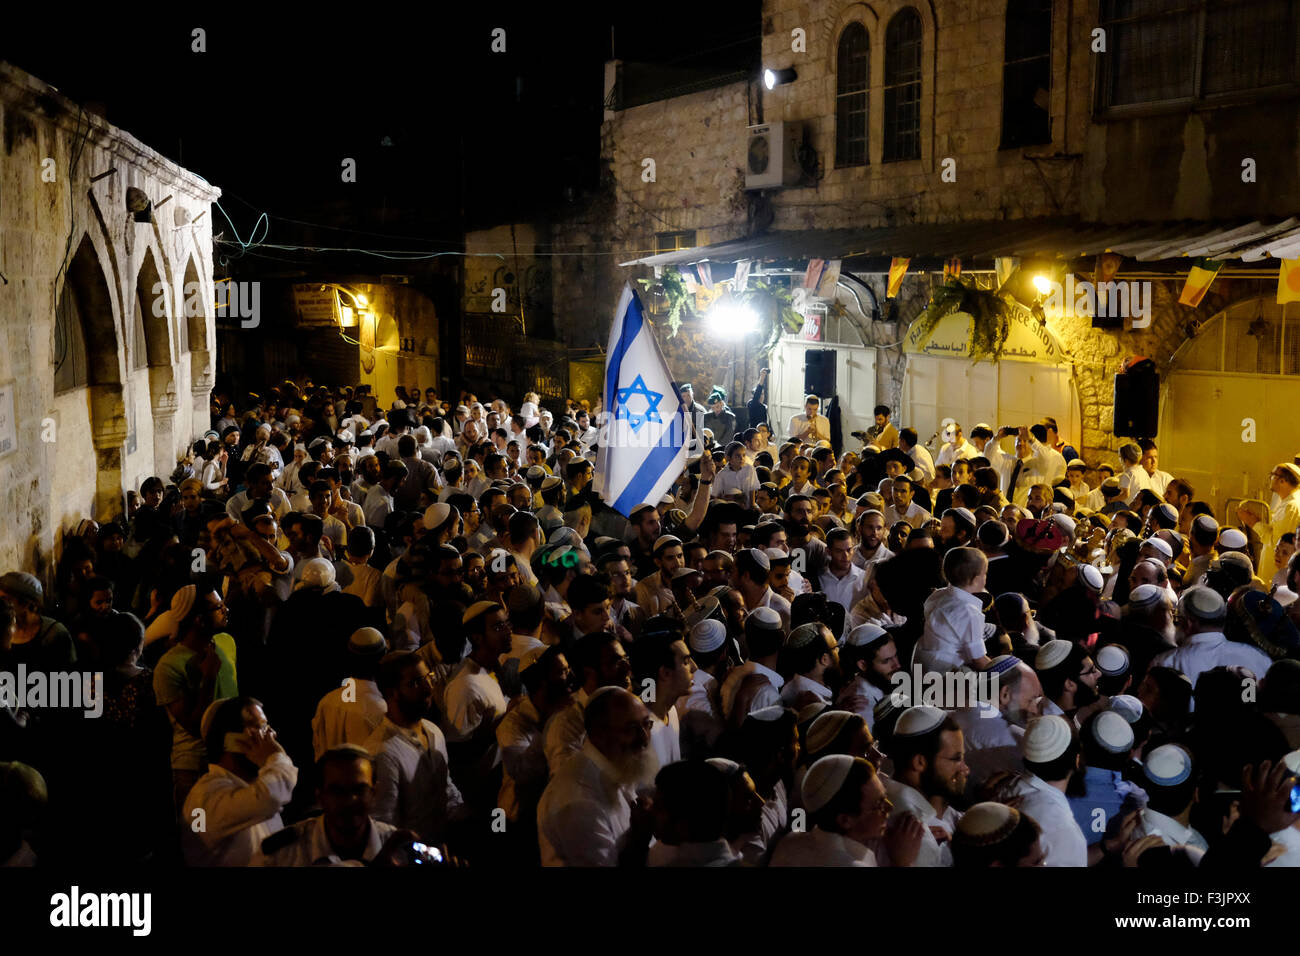 ISRAEL - JERUSALEM 05 OCTOBER: Hundreds of Israeli religious Jews marched to the site of the murders of Rabbi Nehemia Lavi and Aharon Banita Bennett who were murdered in a stabbing attack by a Palestinian last Saturday in Jerusalem's Old City on 05 October 2015. The marchers danced their way through the streets of the Muslim Quarter in the Old City then stopped at Hagai Street, the site of the murders, and there began singing louder and increasing their celebrations. Stock Photo